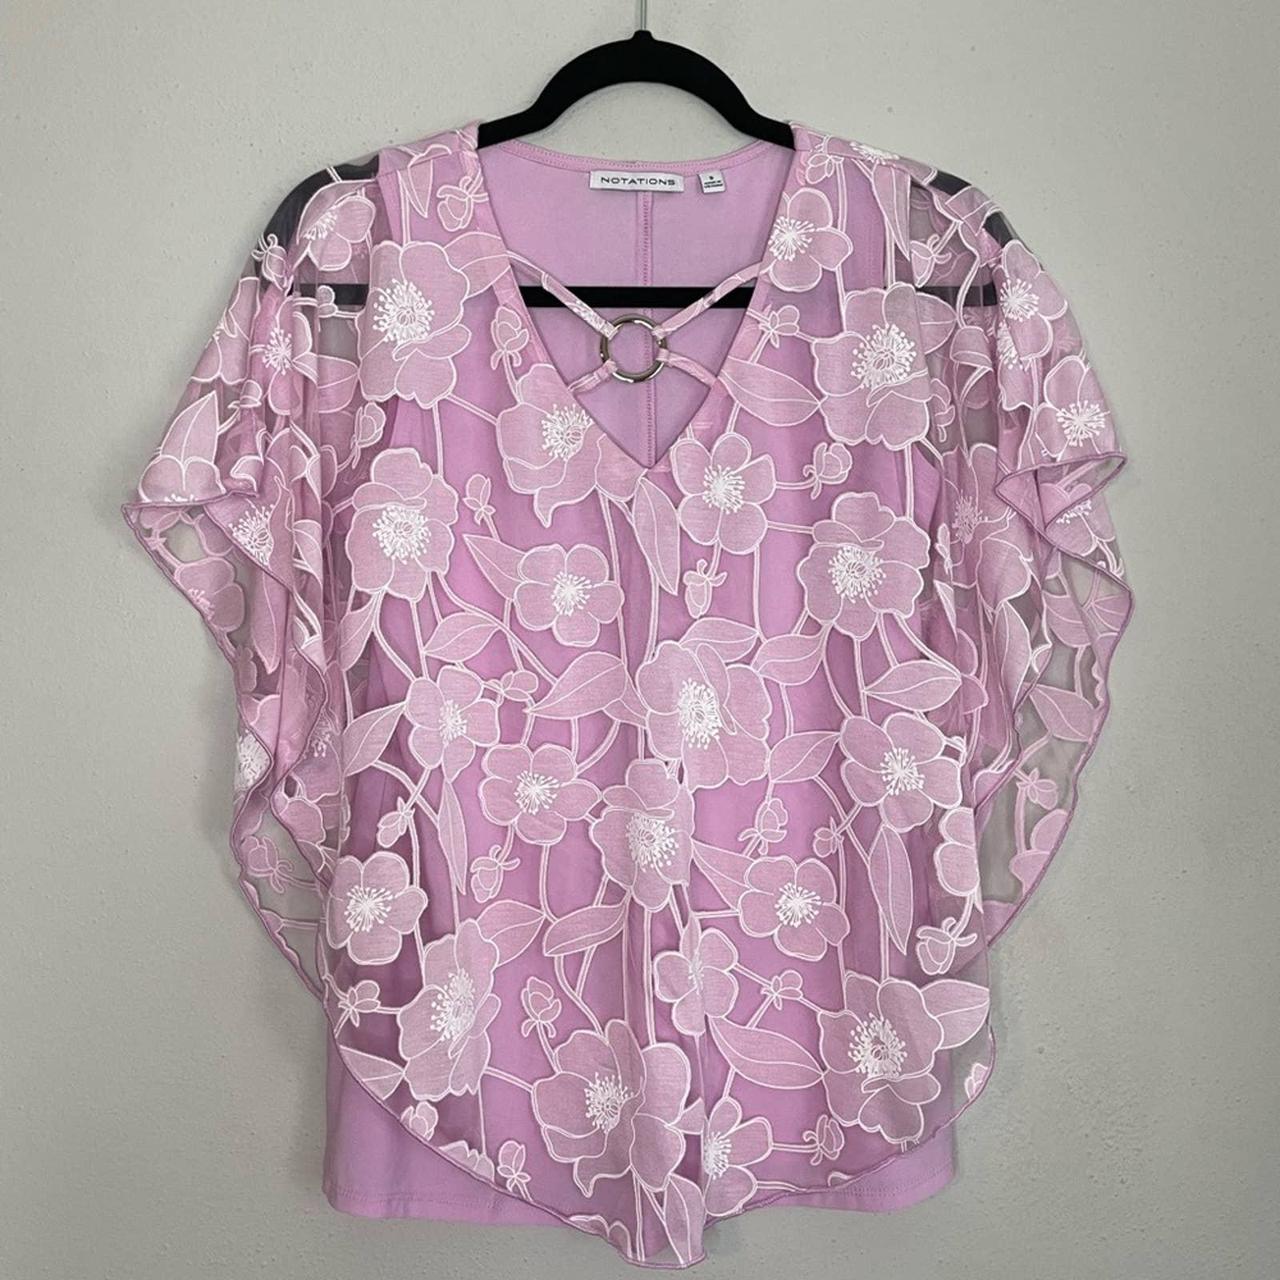 Product Image 2 - Size small

This blouse is stunning